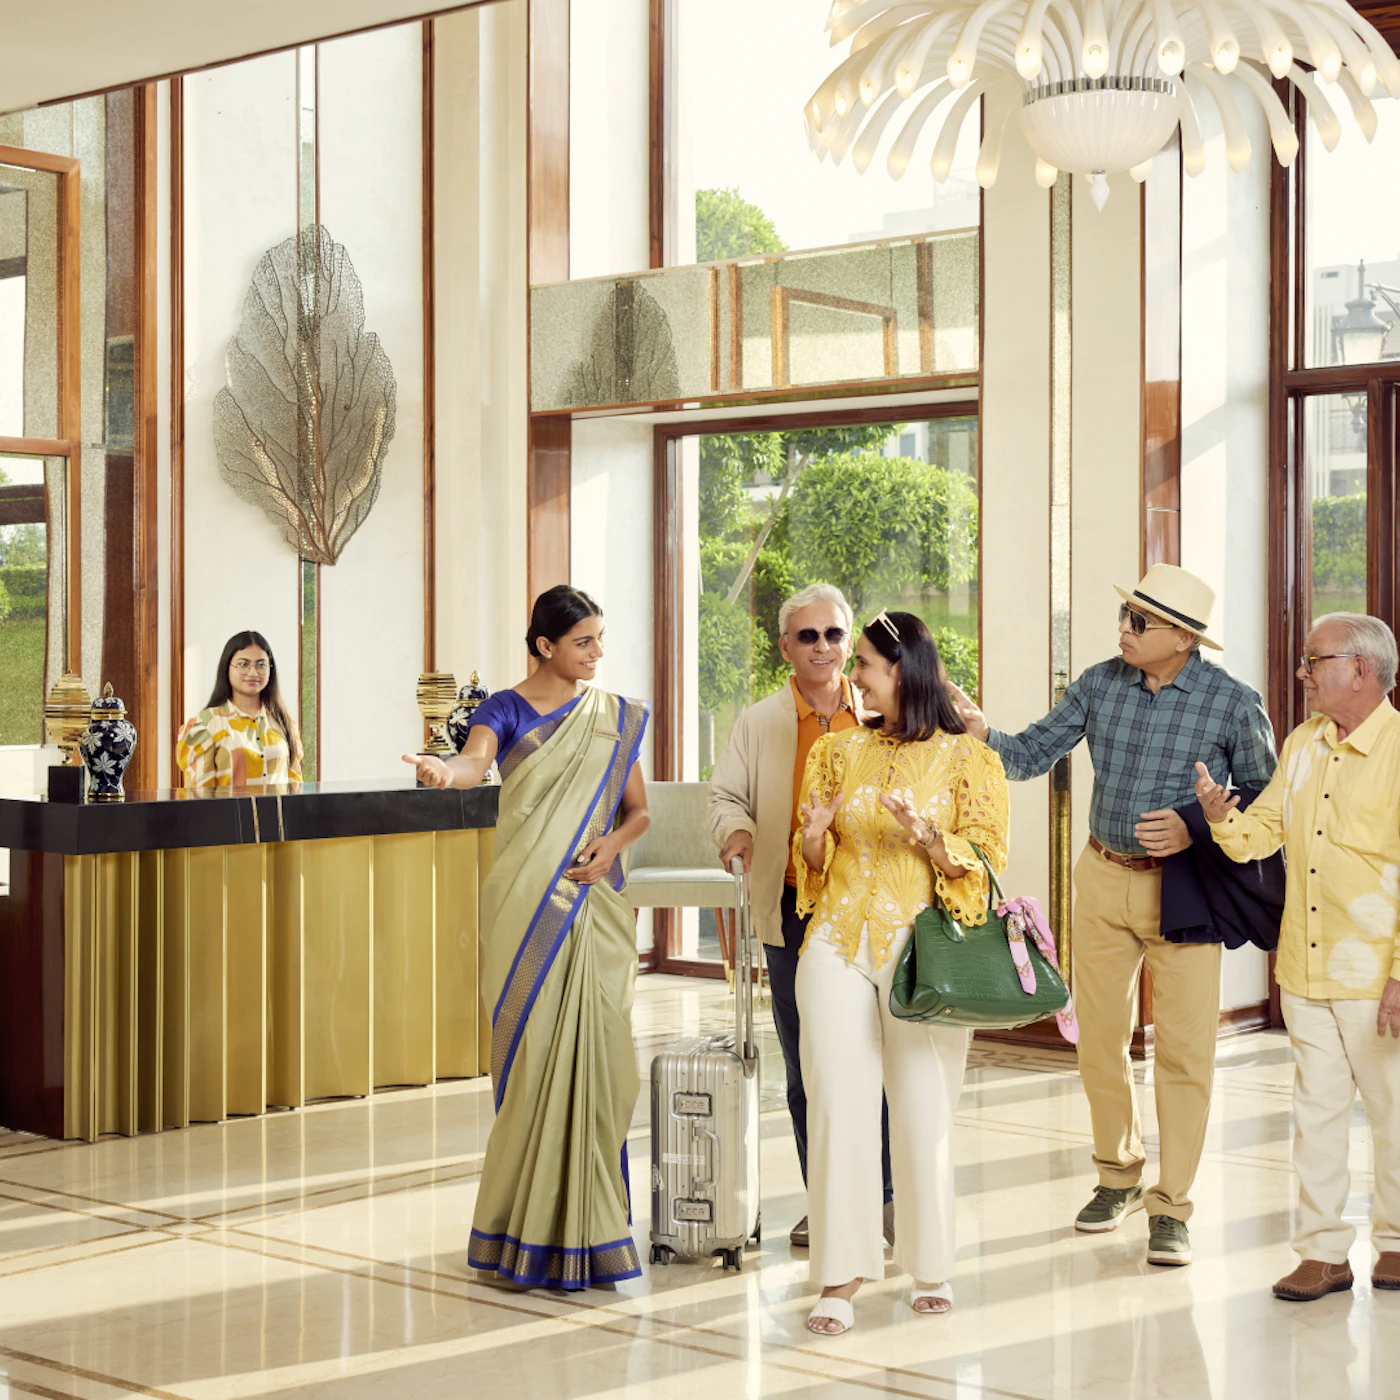 Priya Living Reveals First Community in India Expansion Plans